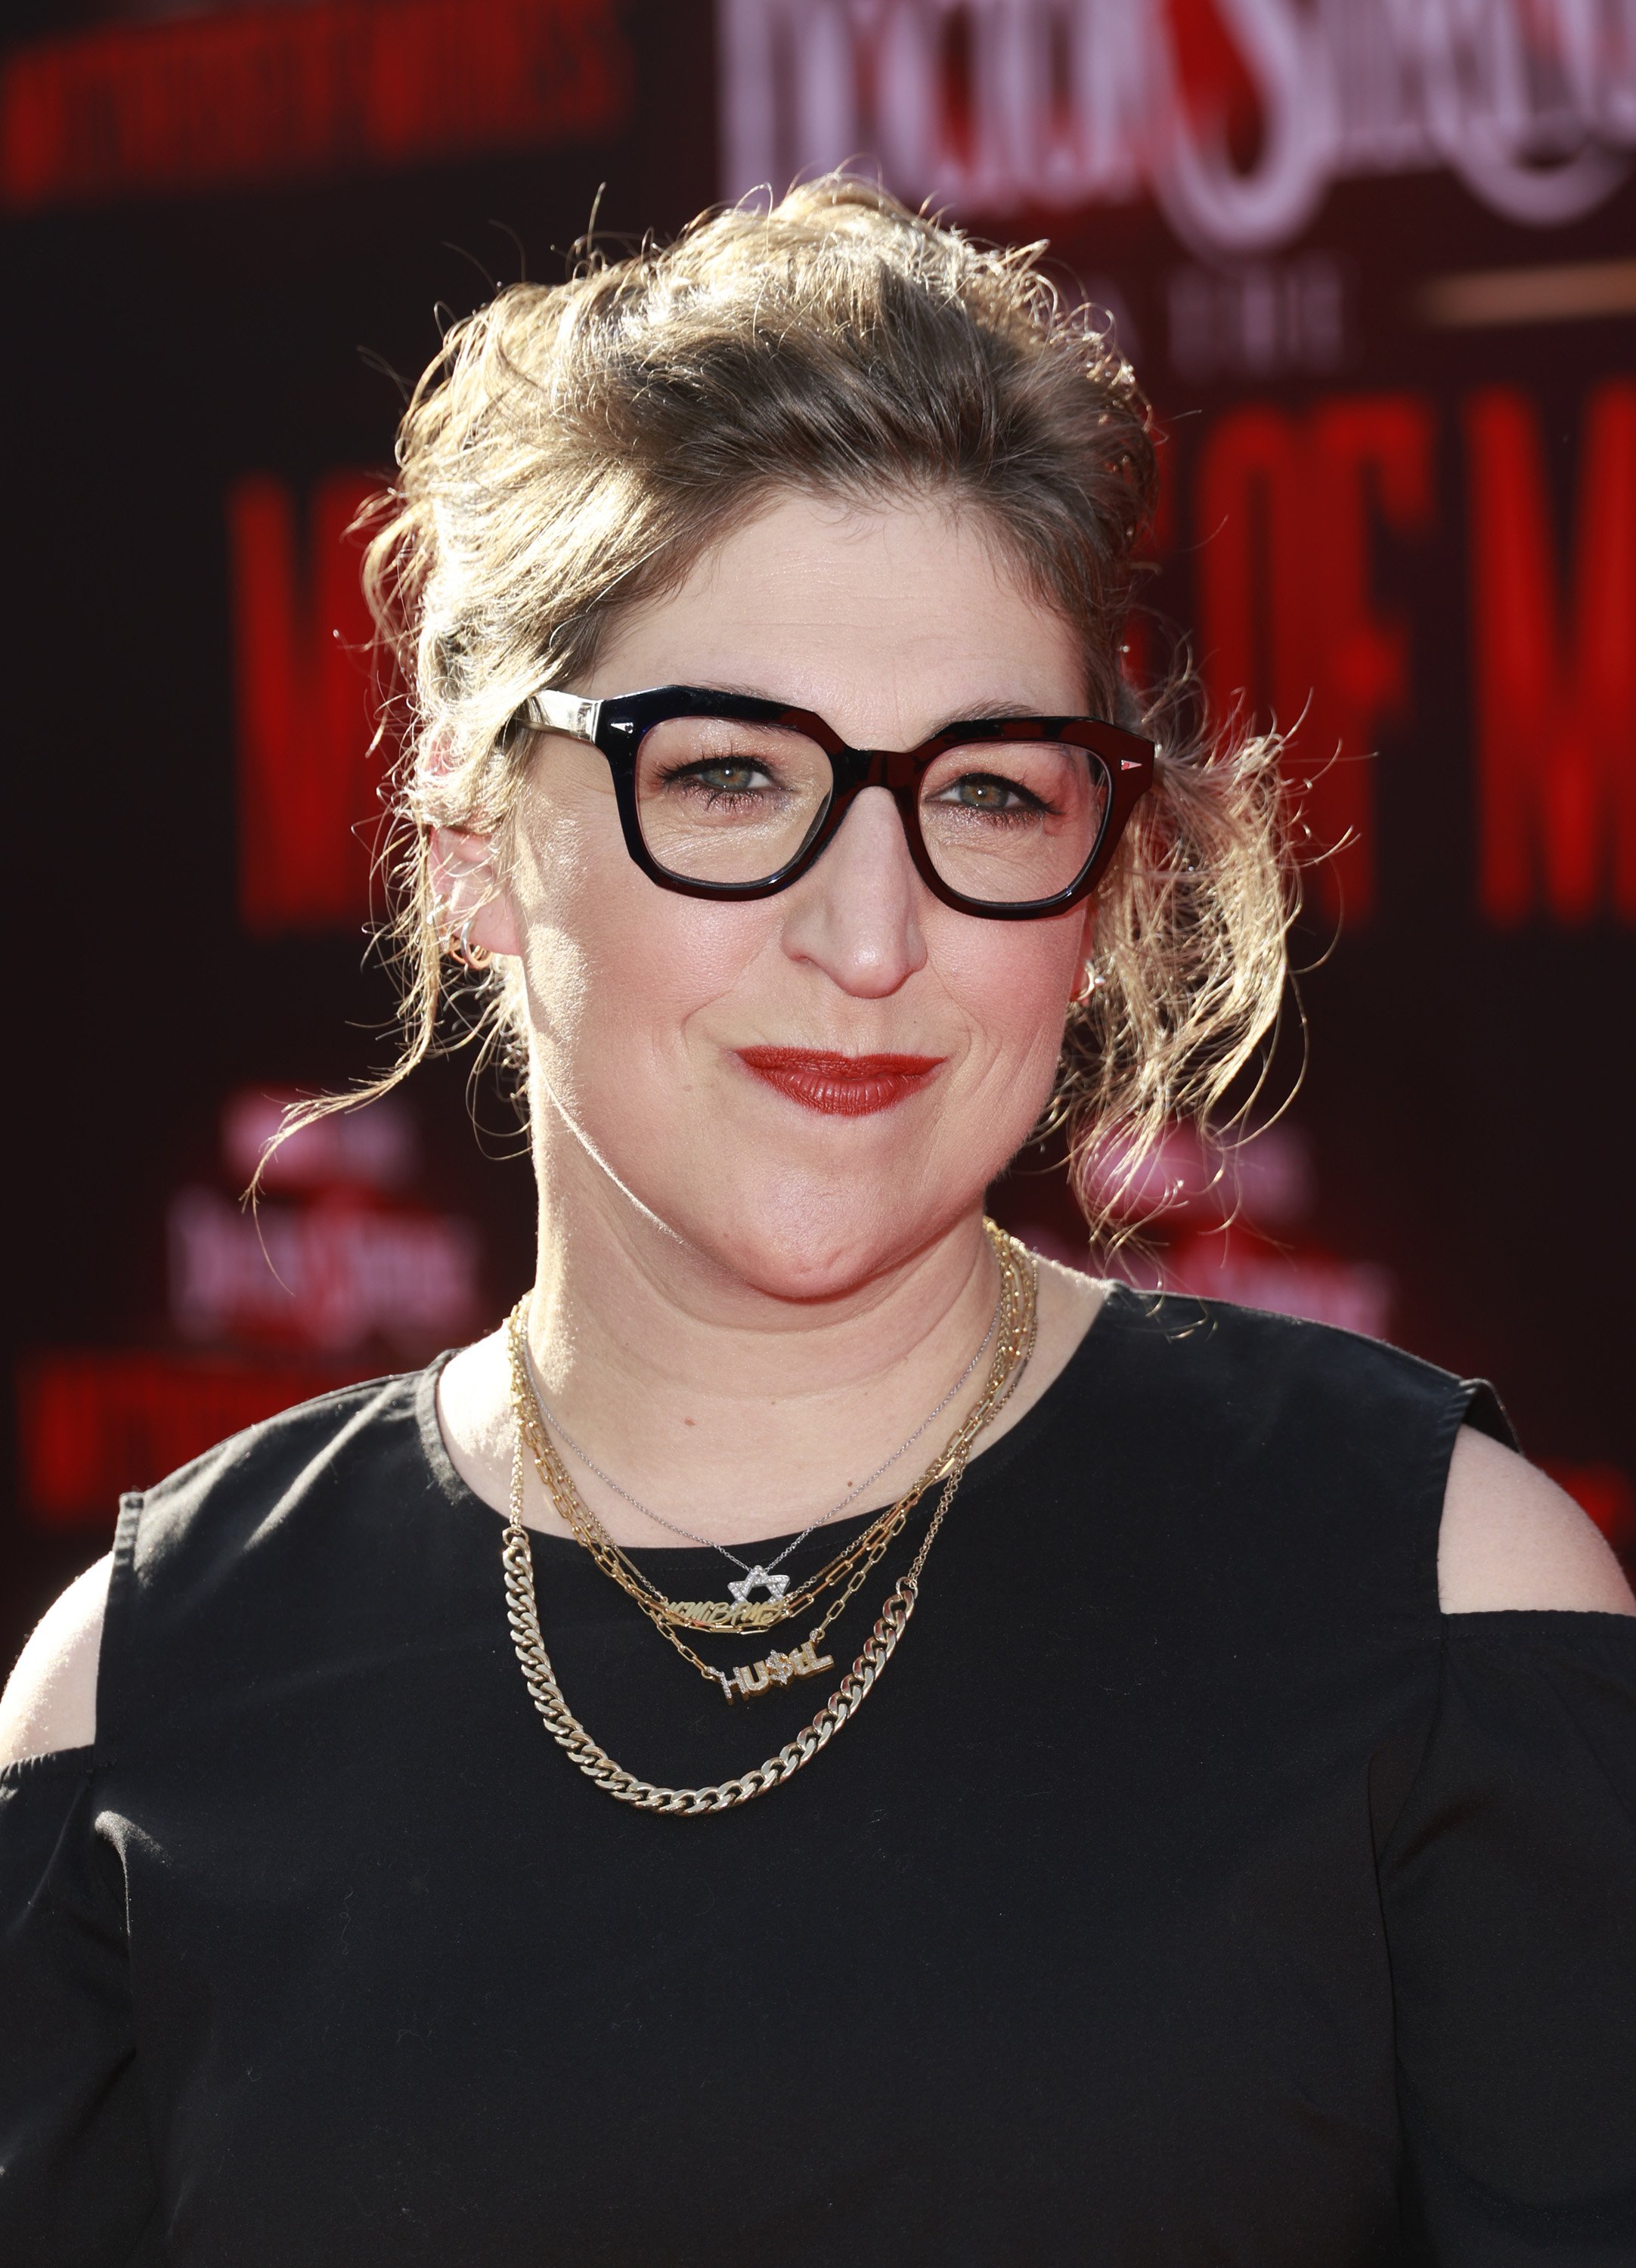 Mayim Bialik at Dolby Theatre on May 02, 2022, in Hollywood, California. | Source: Getty Images